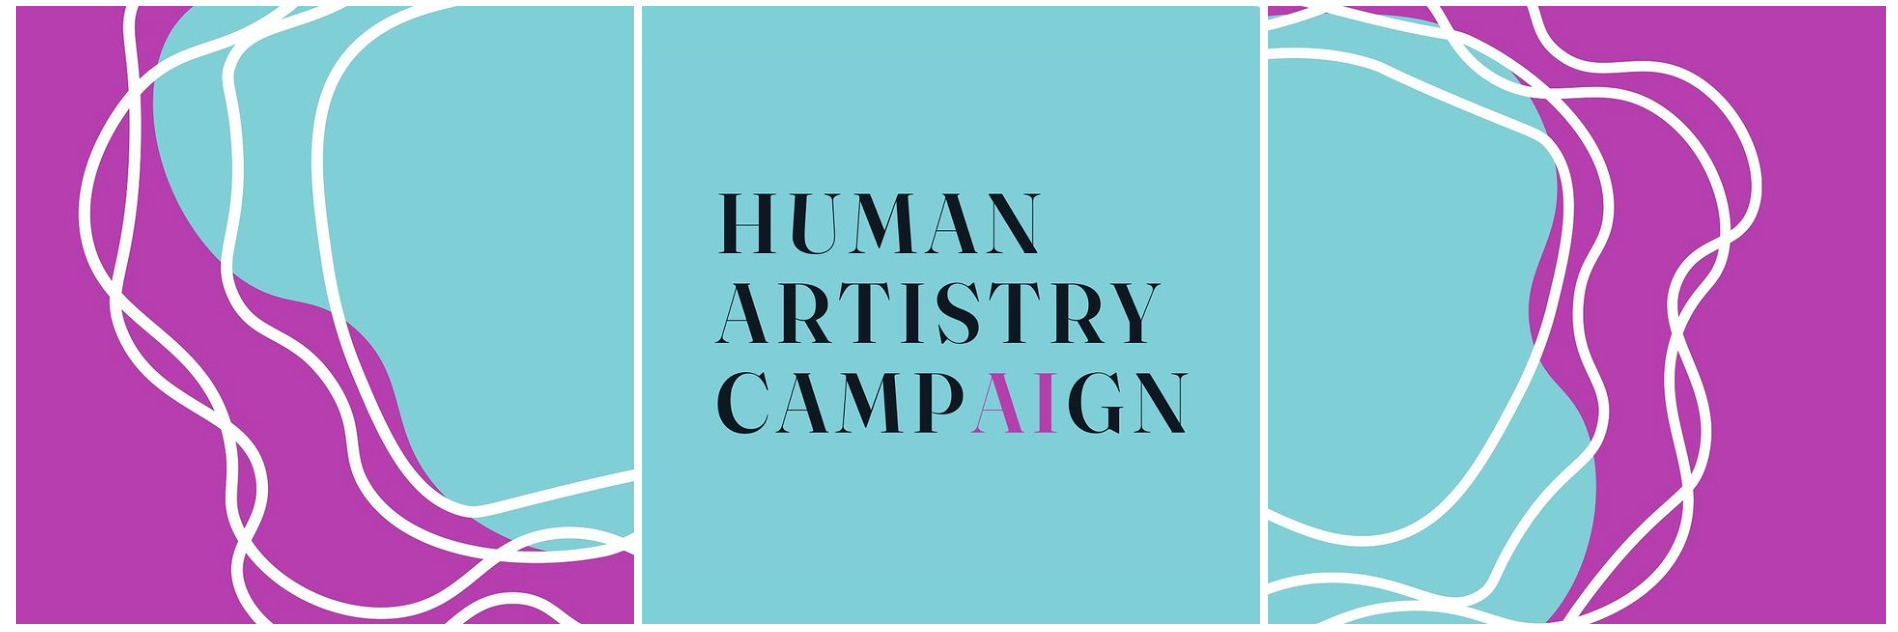 HUMAN ARTISTRY CAMPAIGN